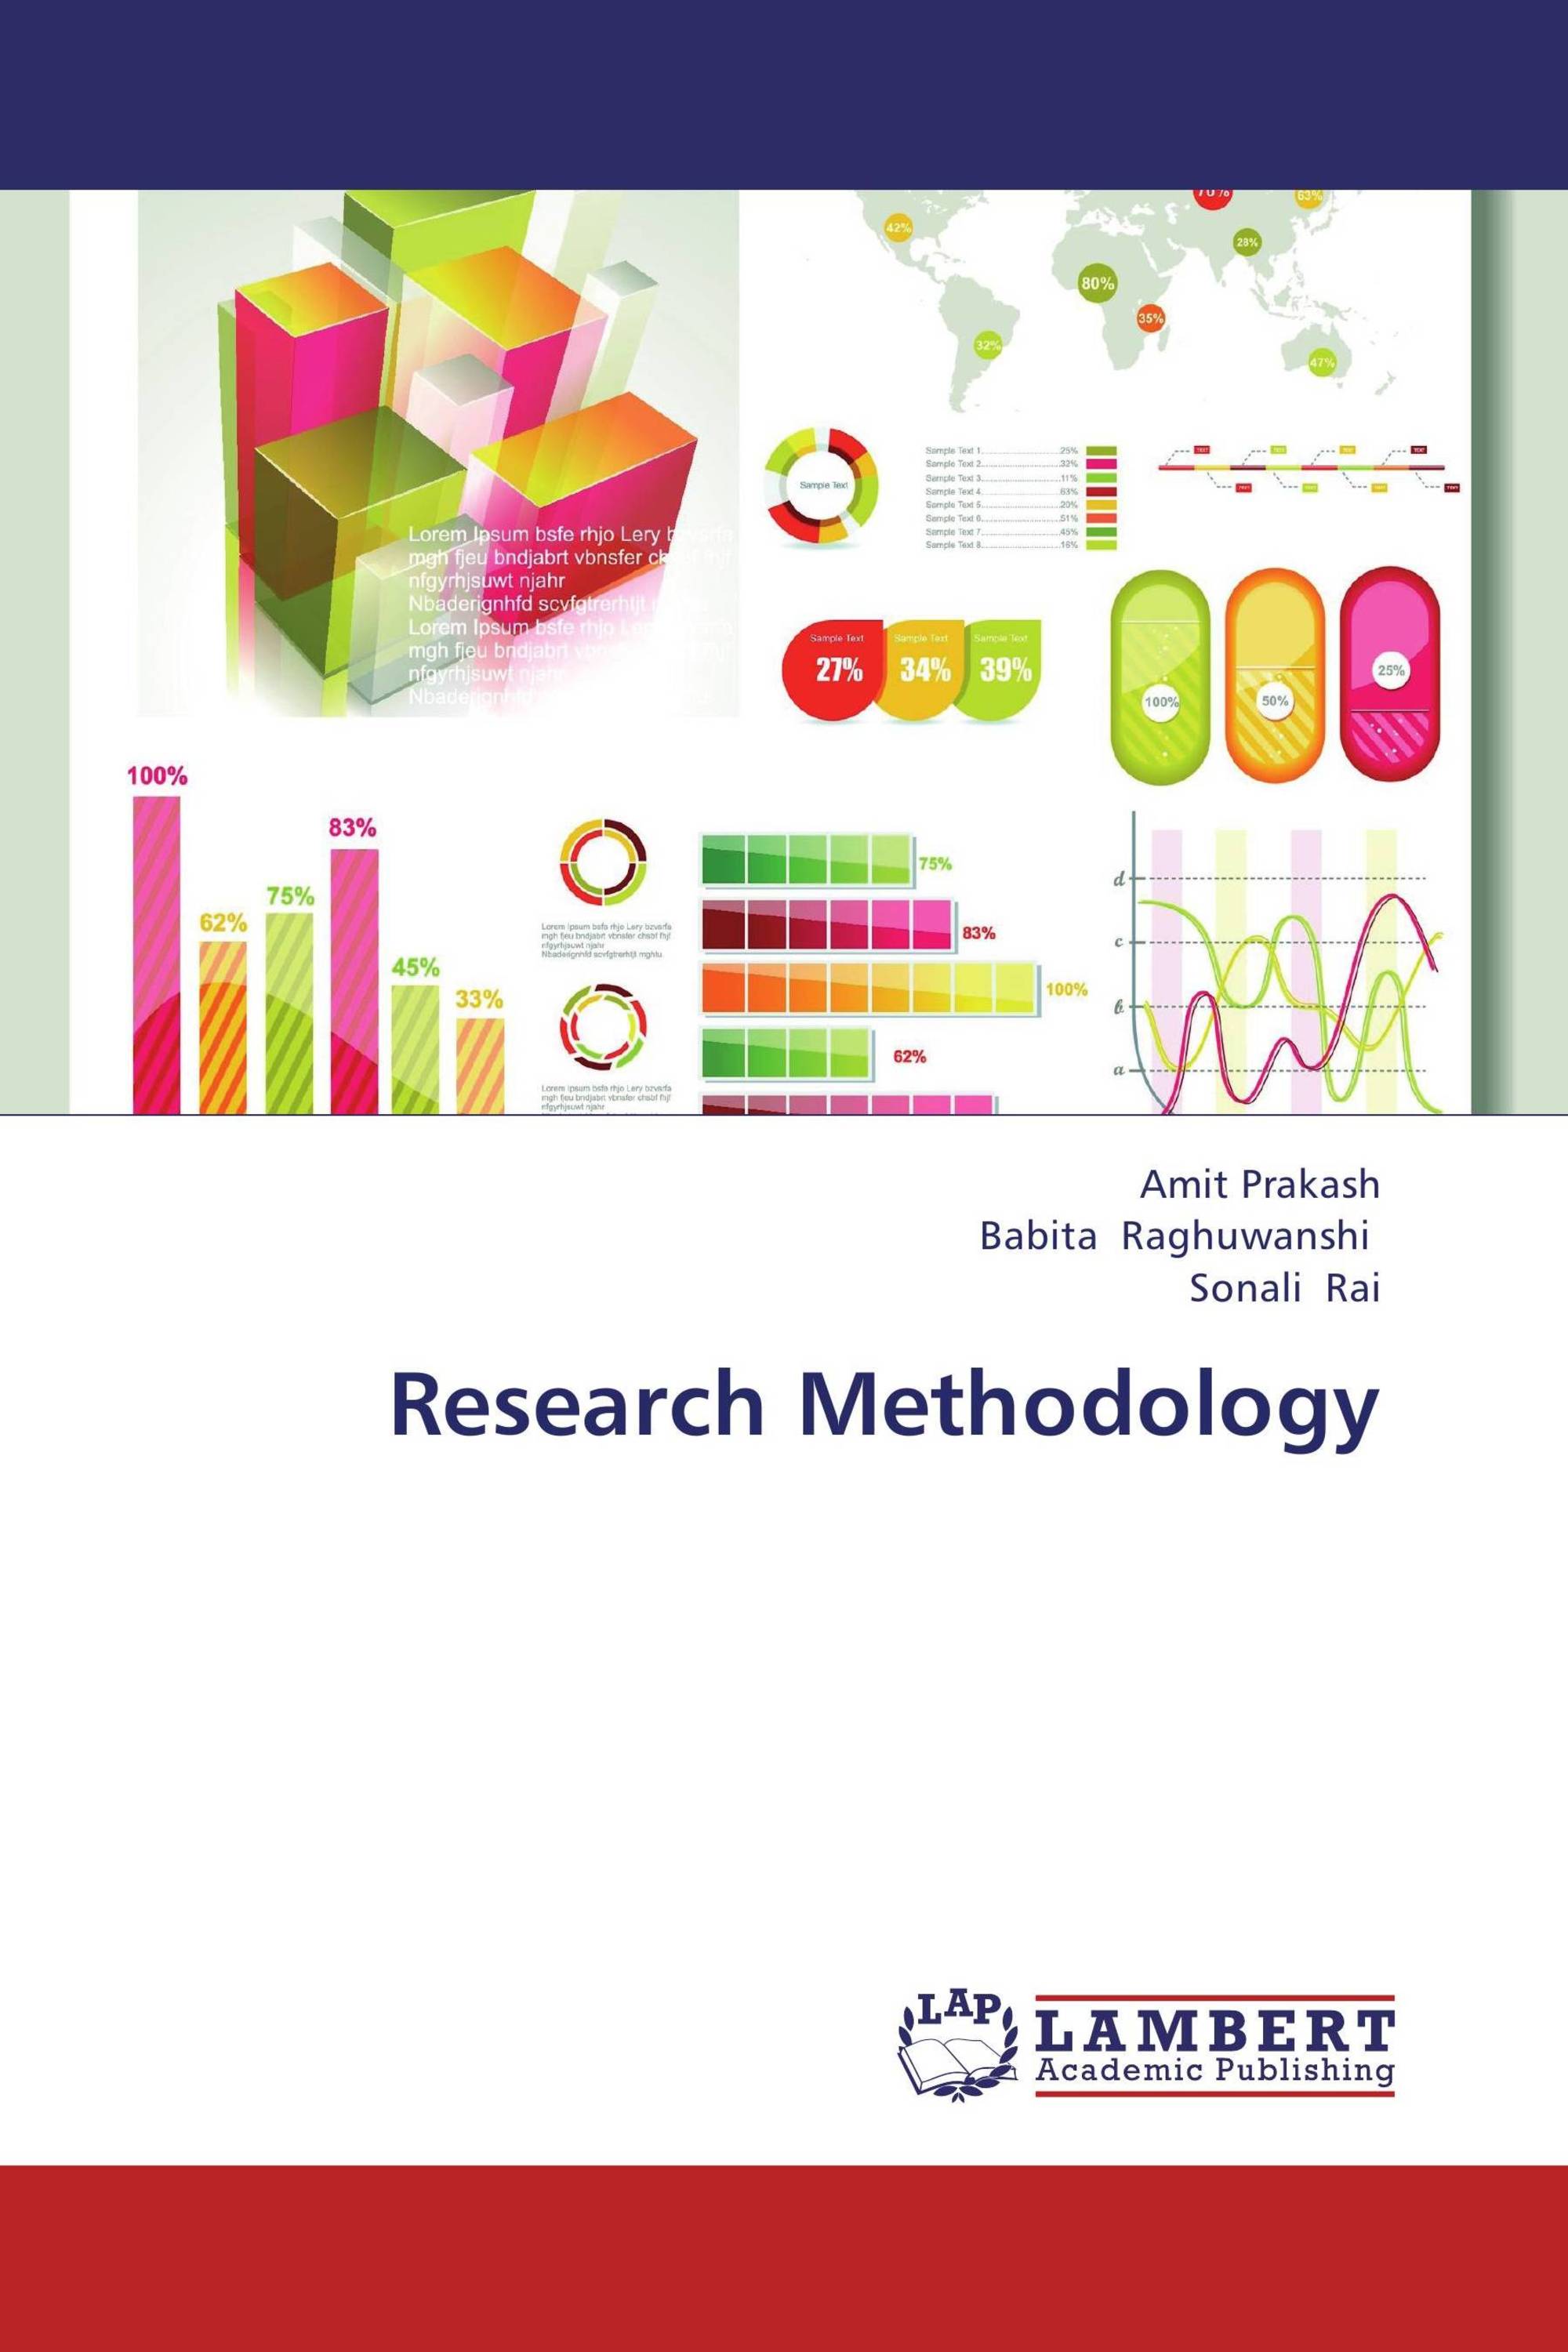 book review research methodology